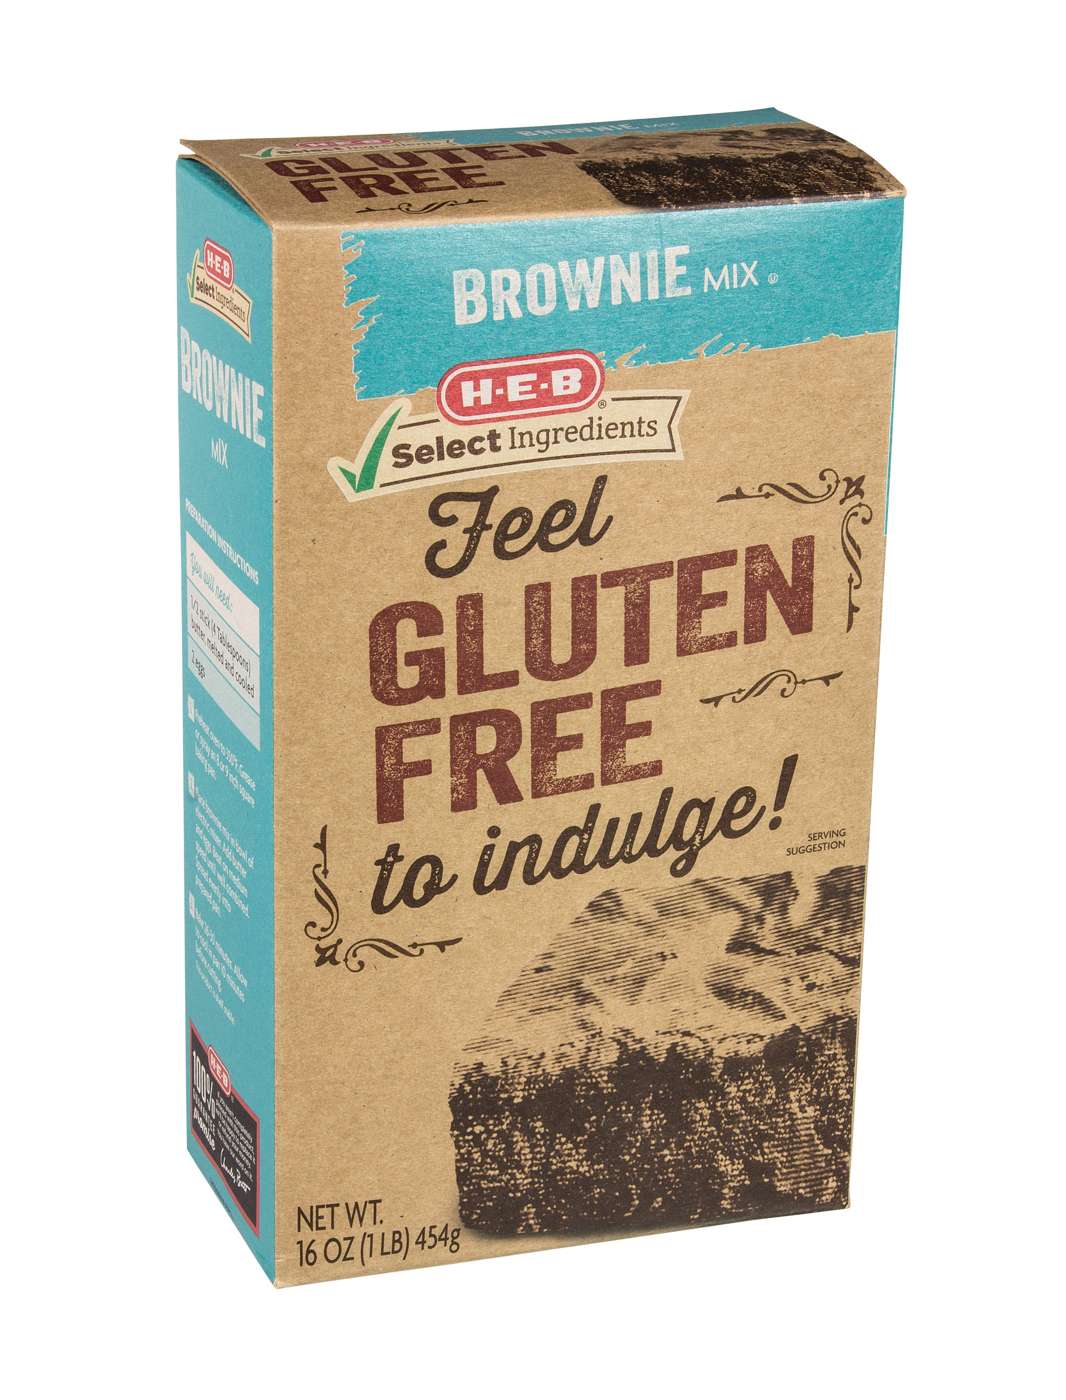 H-E-B Gluten Free Brownie Mix; image 1 of 2